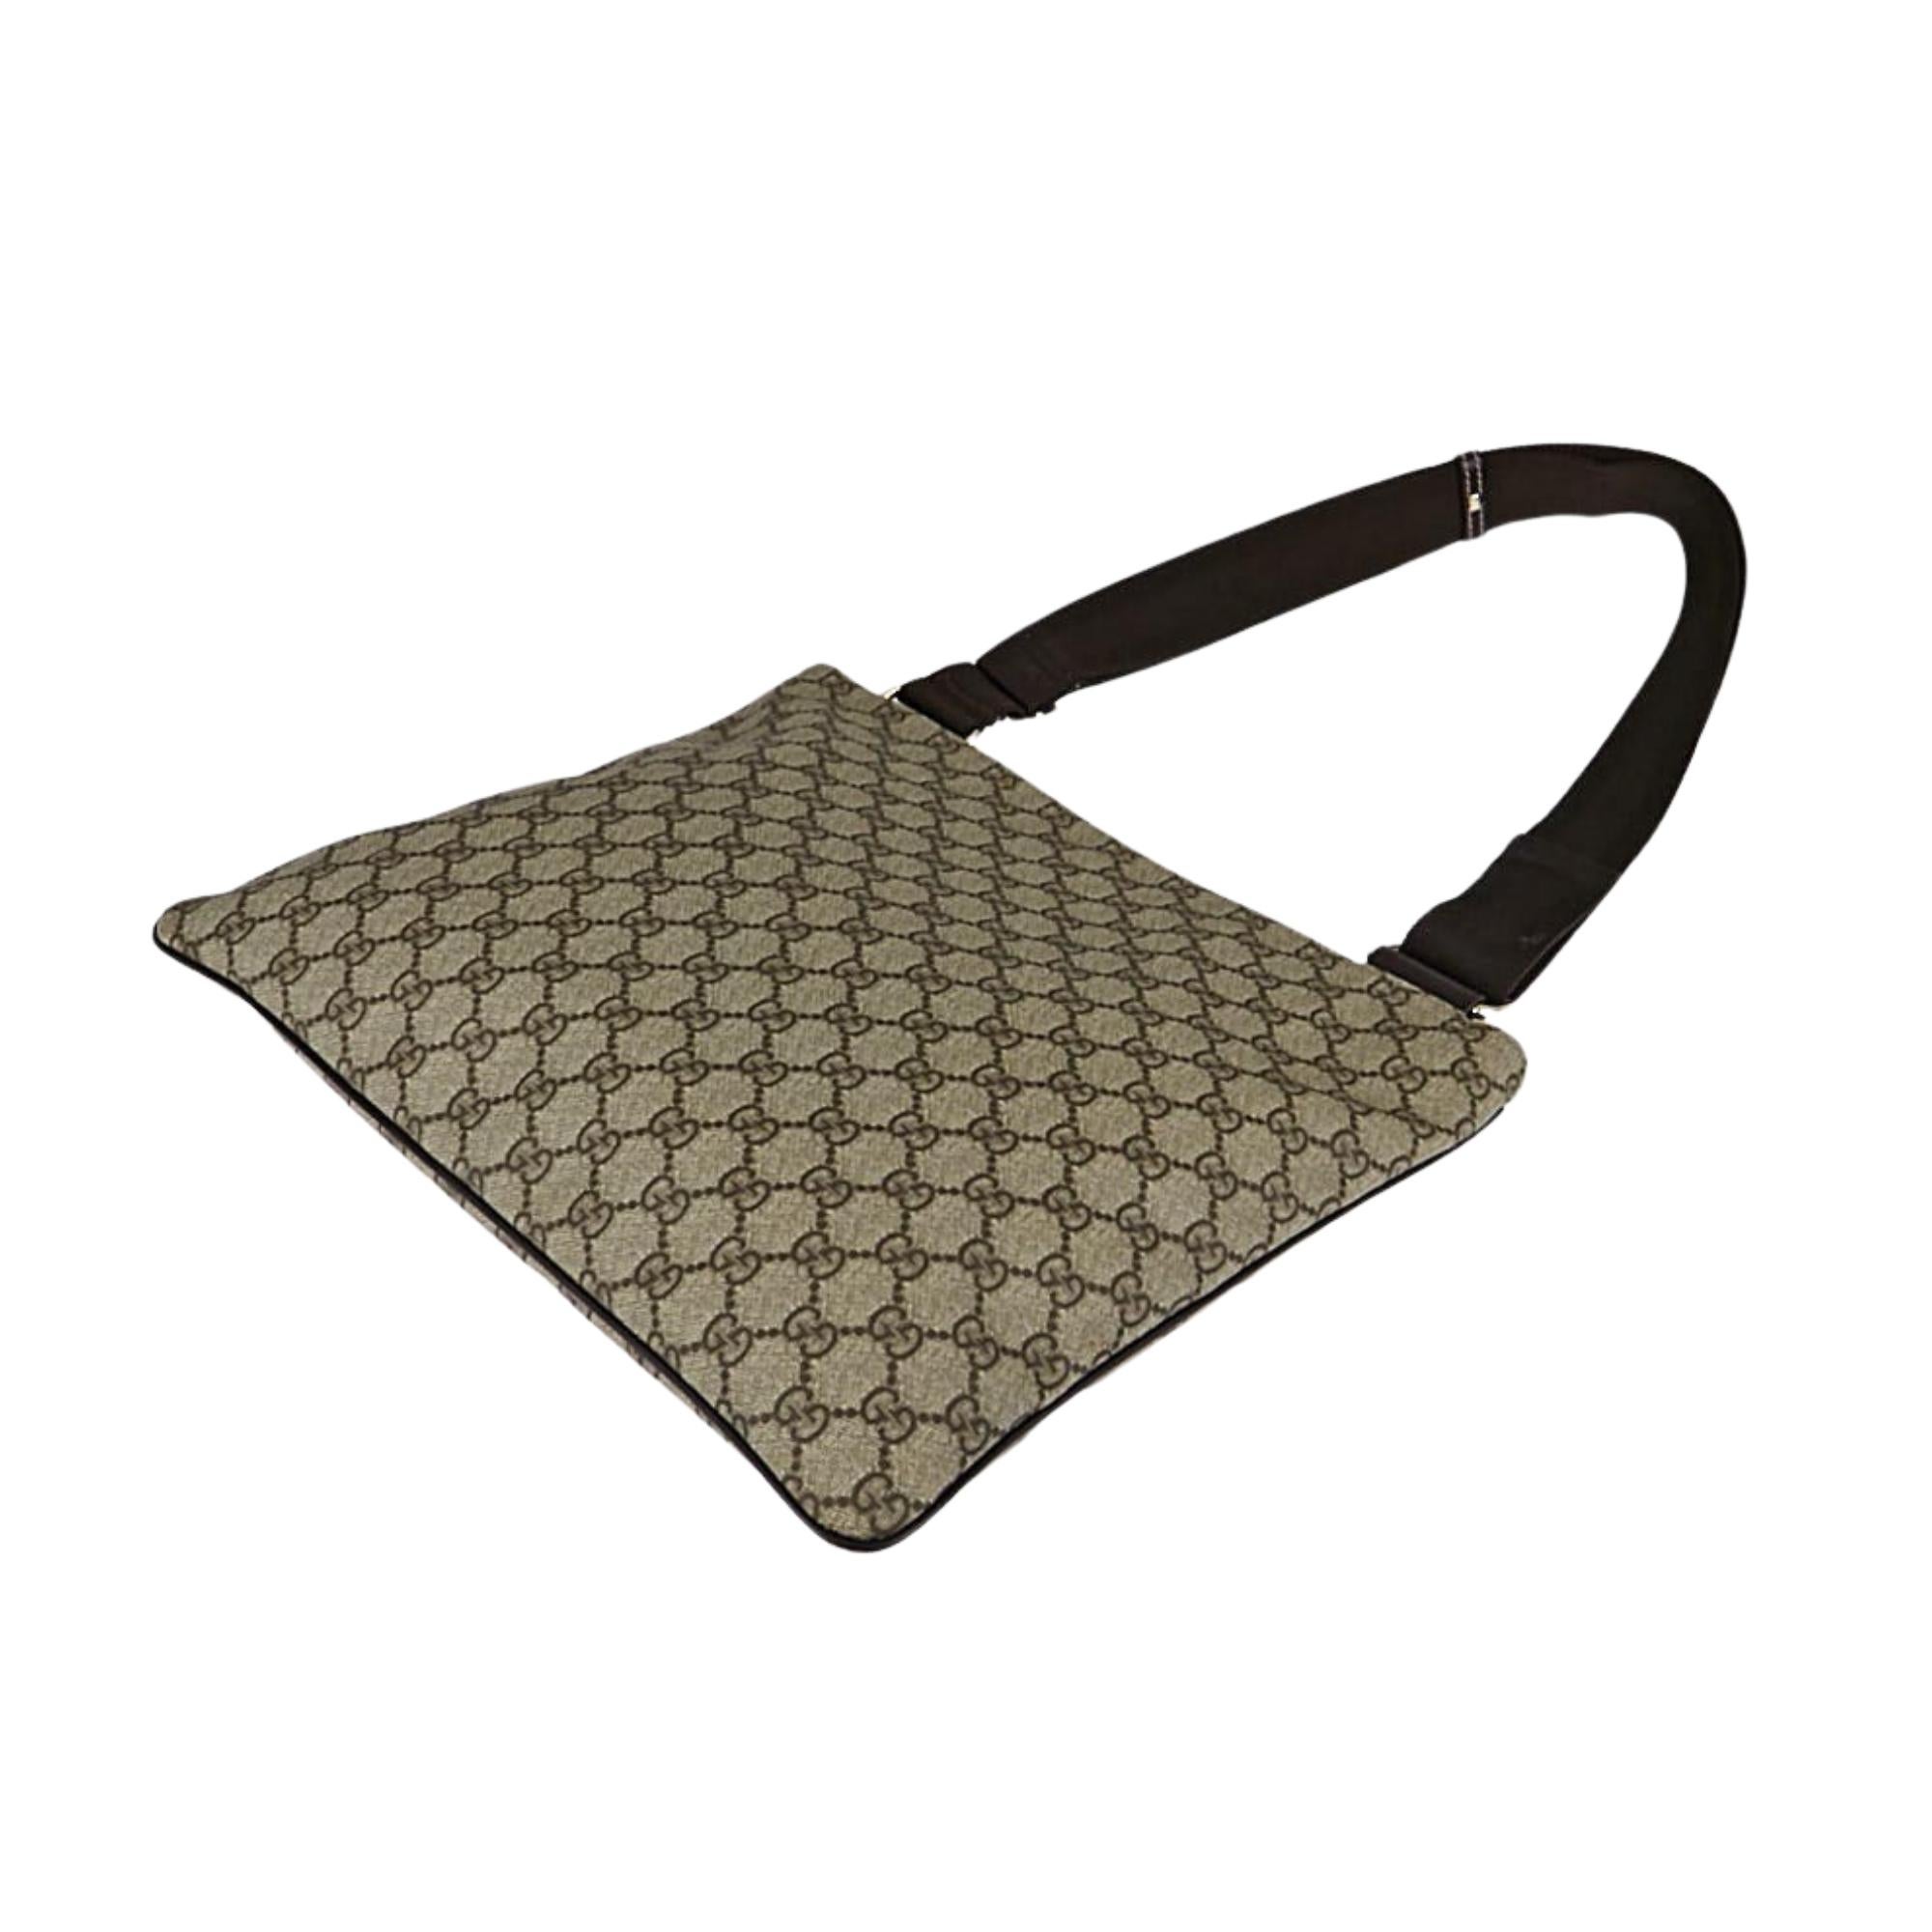 This Gucci beige/ebony monogram crossbody bag is made with GG supreme coated canvas with leather finishes and a woven fabric shoulder strap. The bag features zip closure and a light cream coloured woven fabric interior with a slip pocket for your